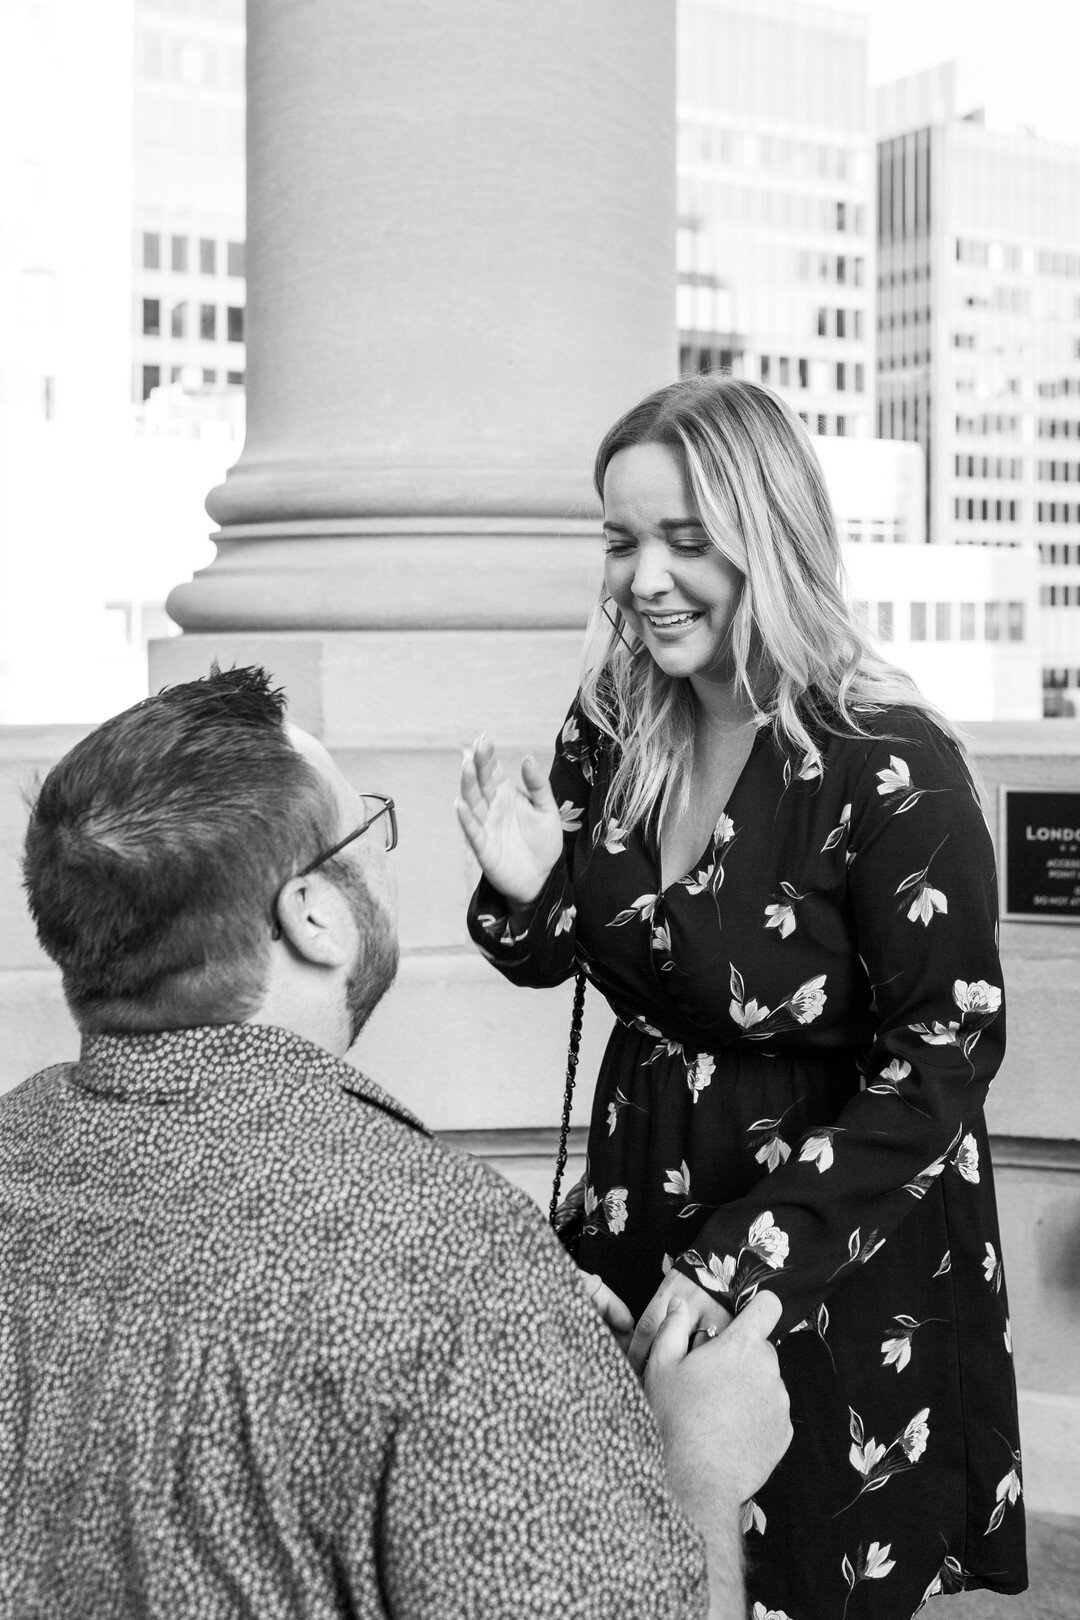 LondonHouse Chicago Proposal captured by Emma Belen Photography. Find more wedding proposal ideas on CHItheeWED.com!